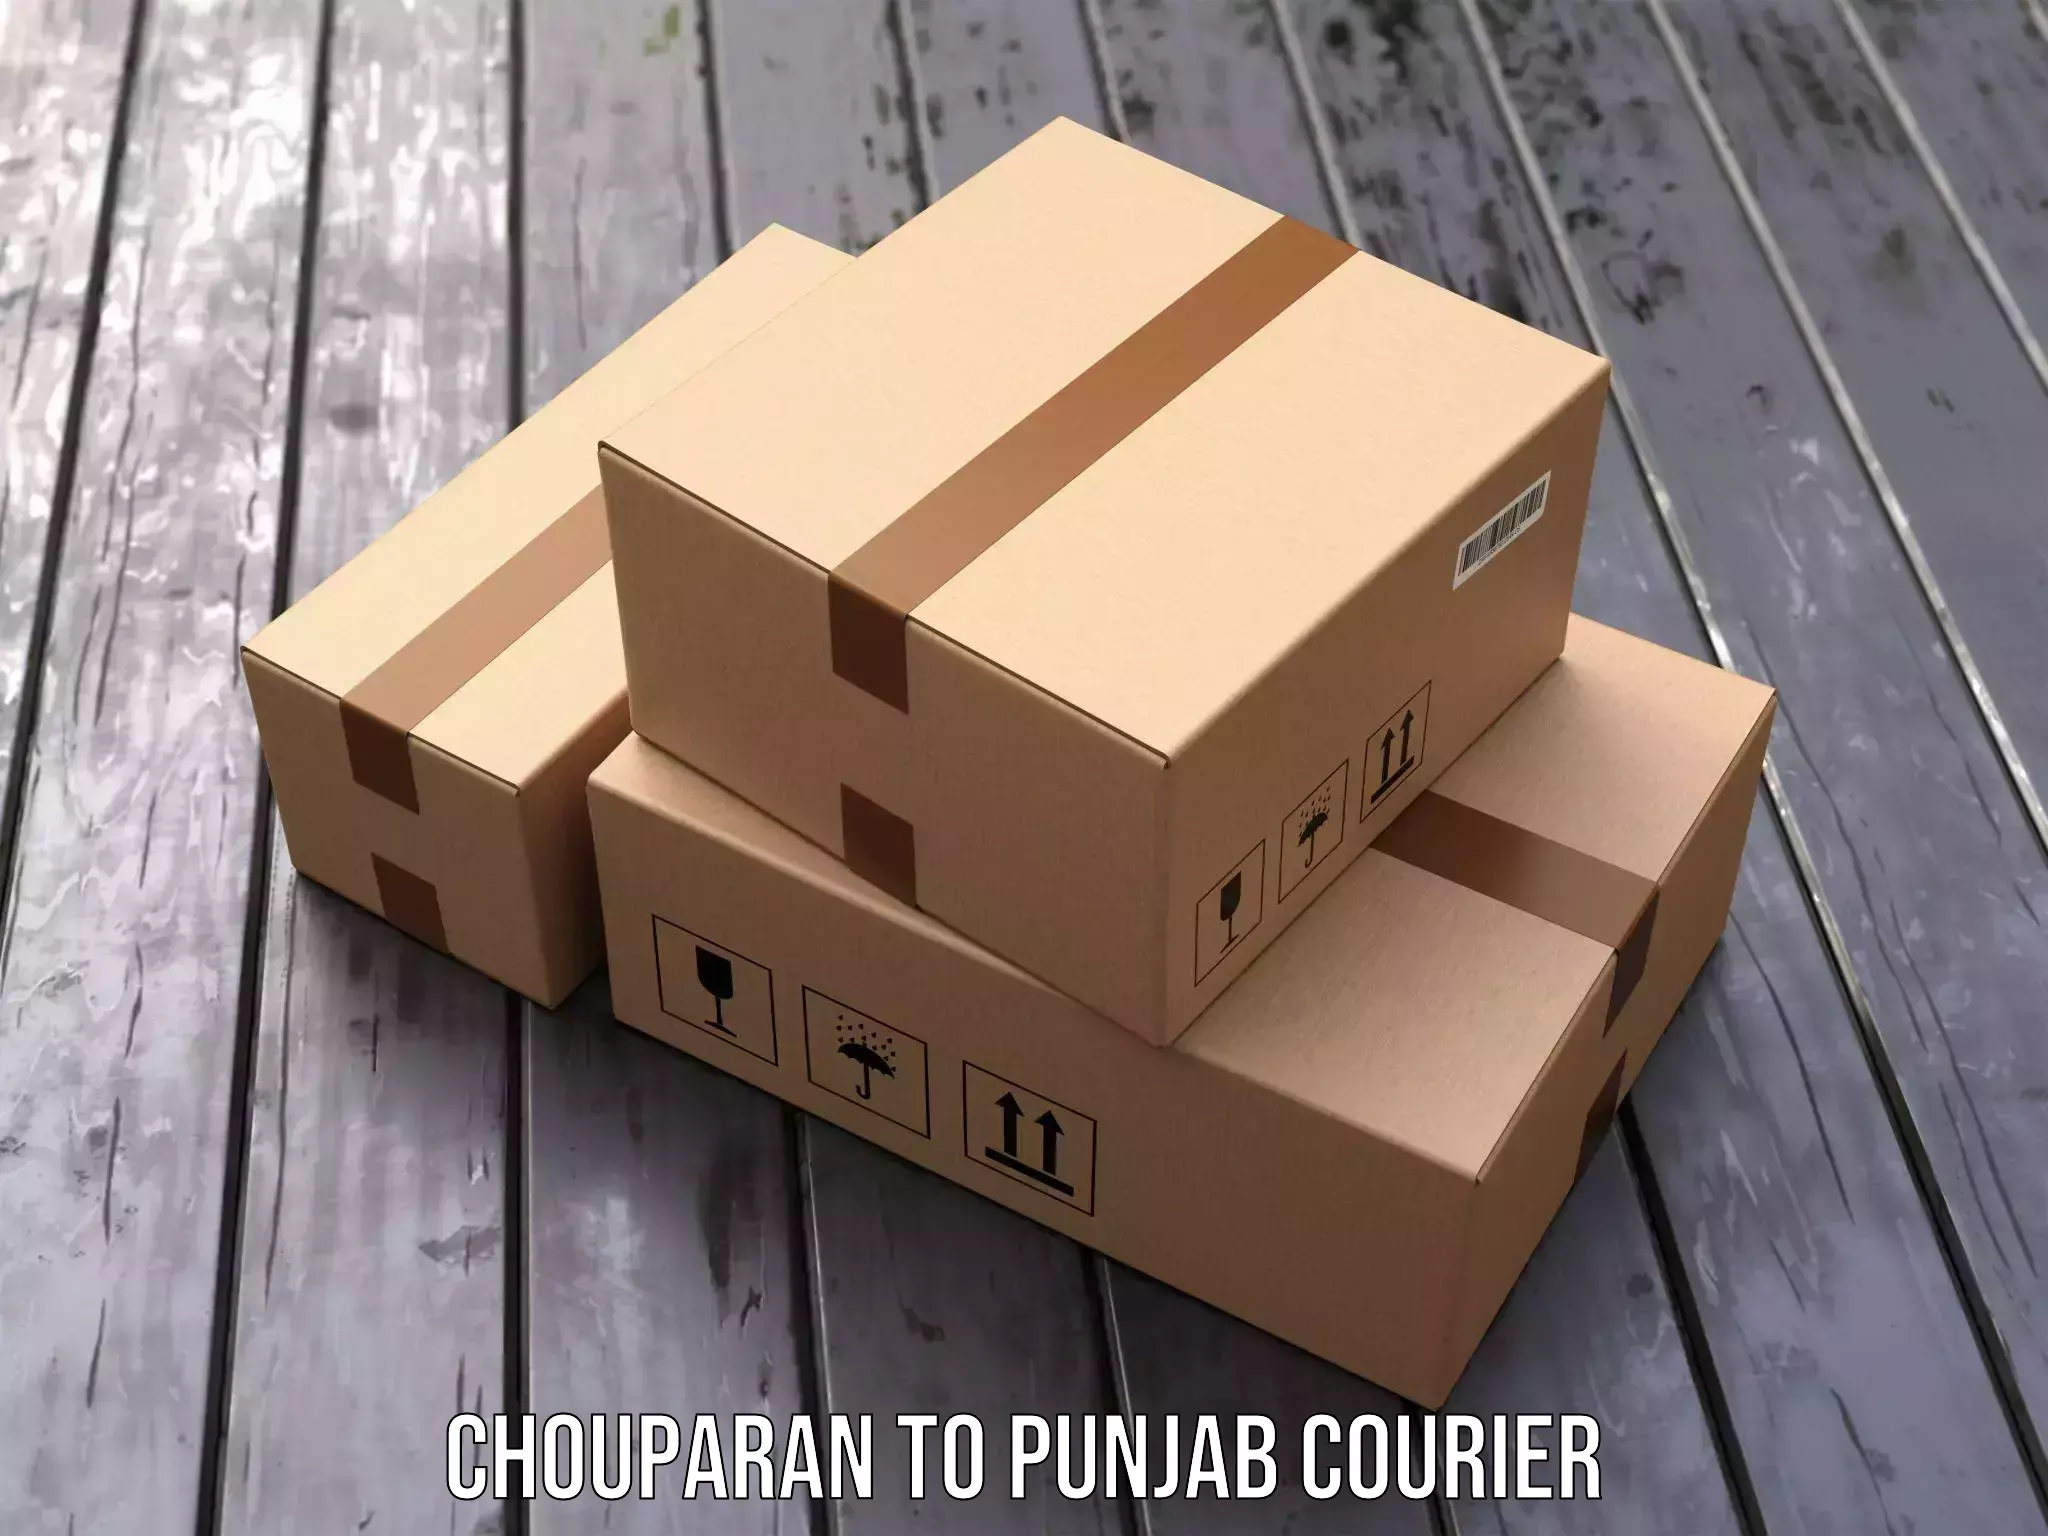 Easy access courier services in Chouparan to Jalandhar